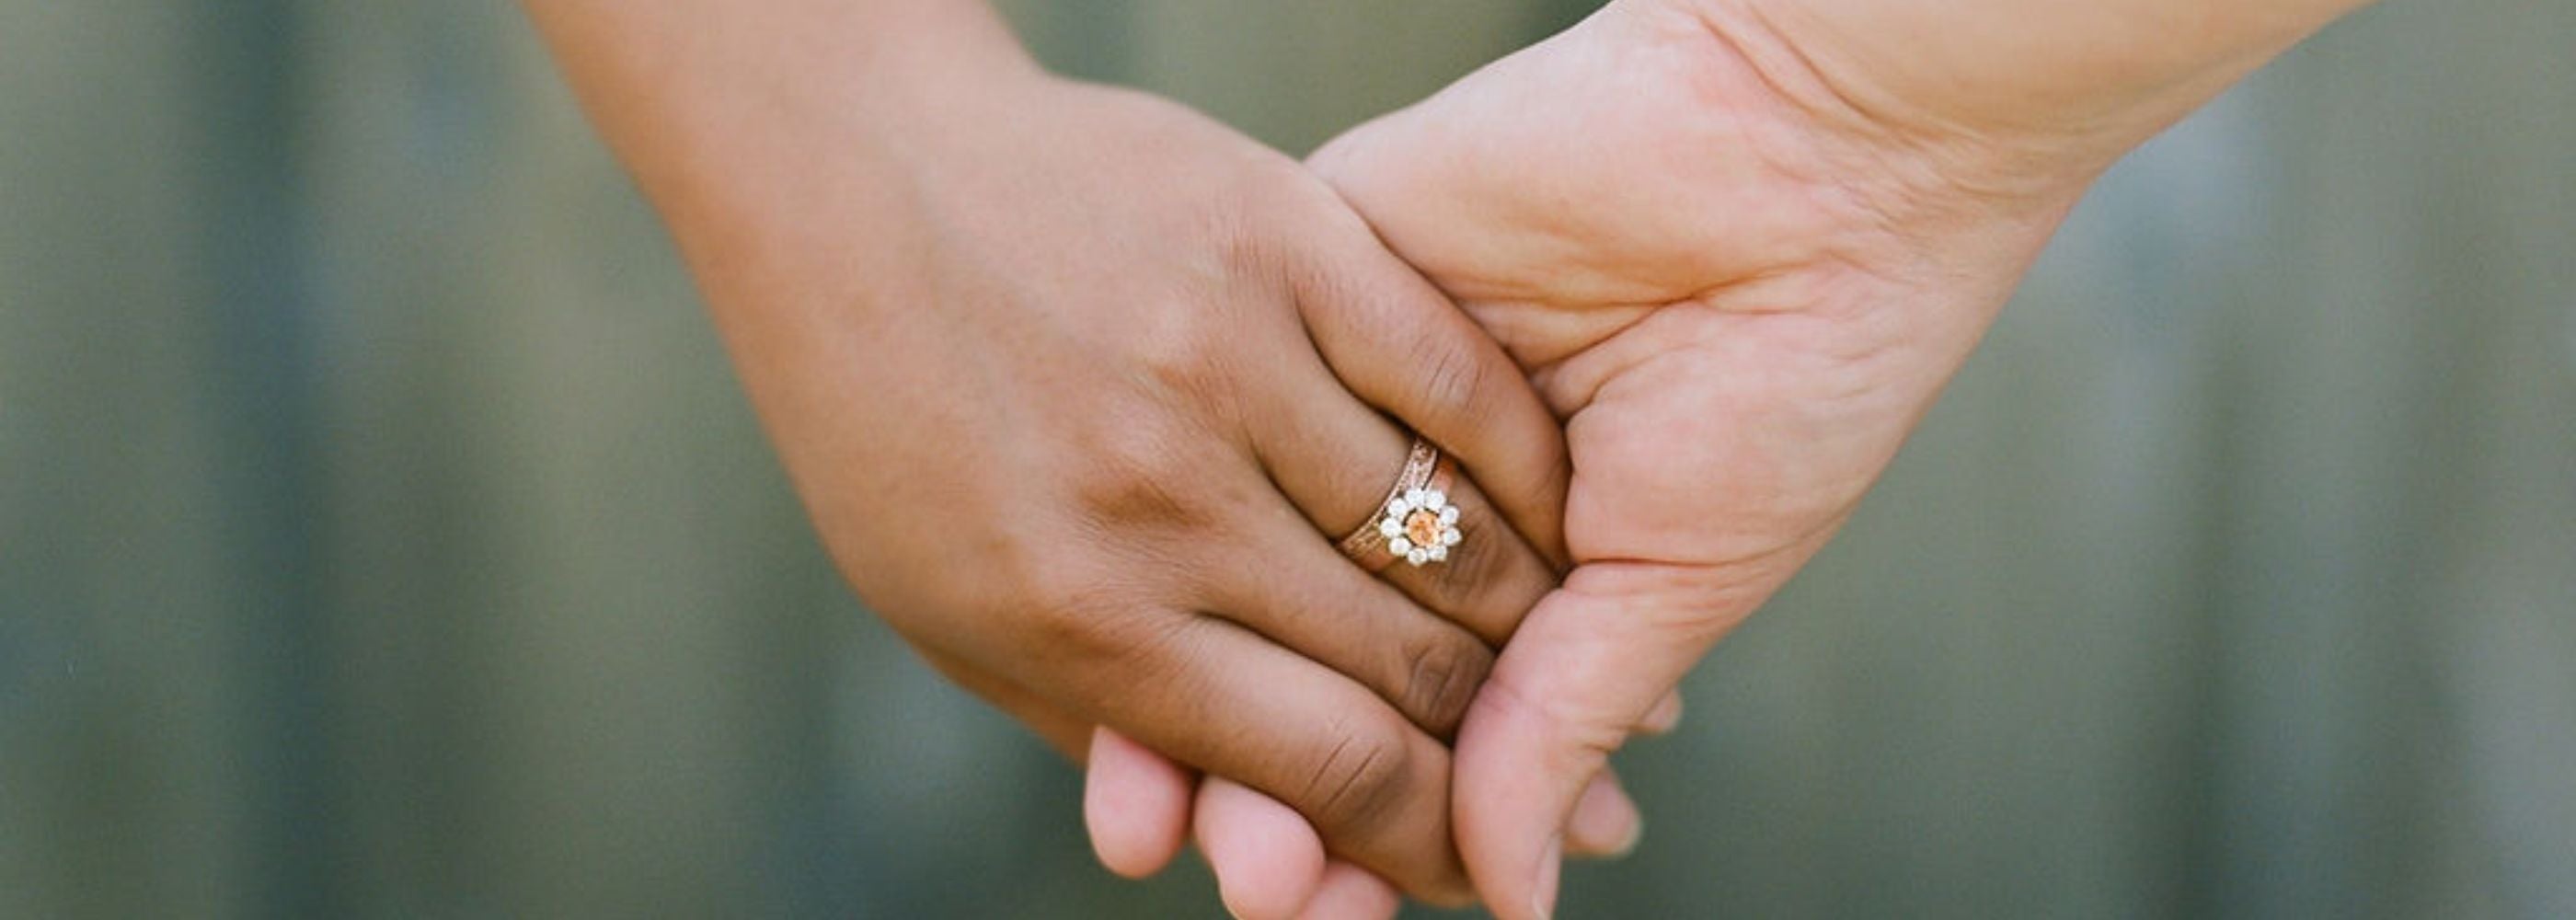 two women hold hands, a colourful pink engagement ring with halo is worn